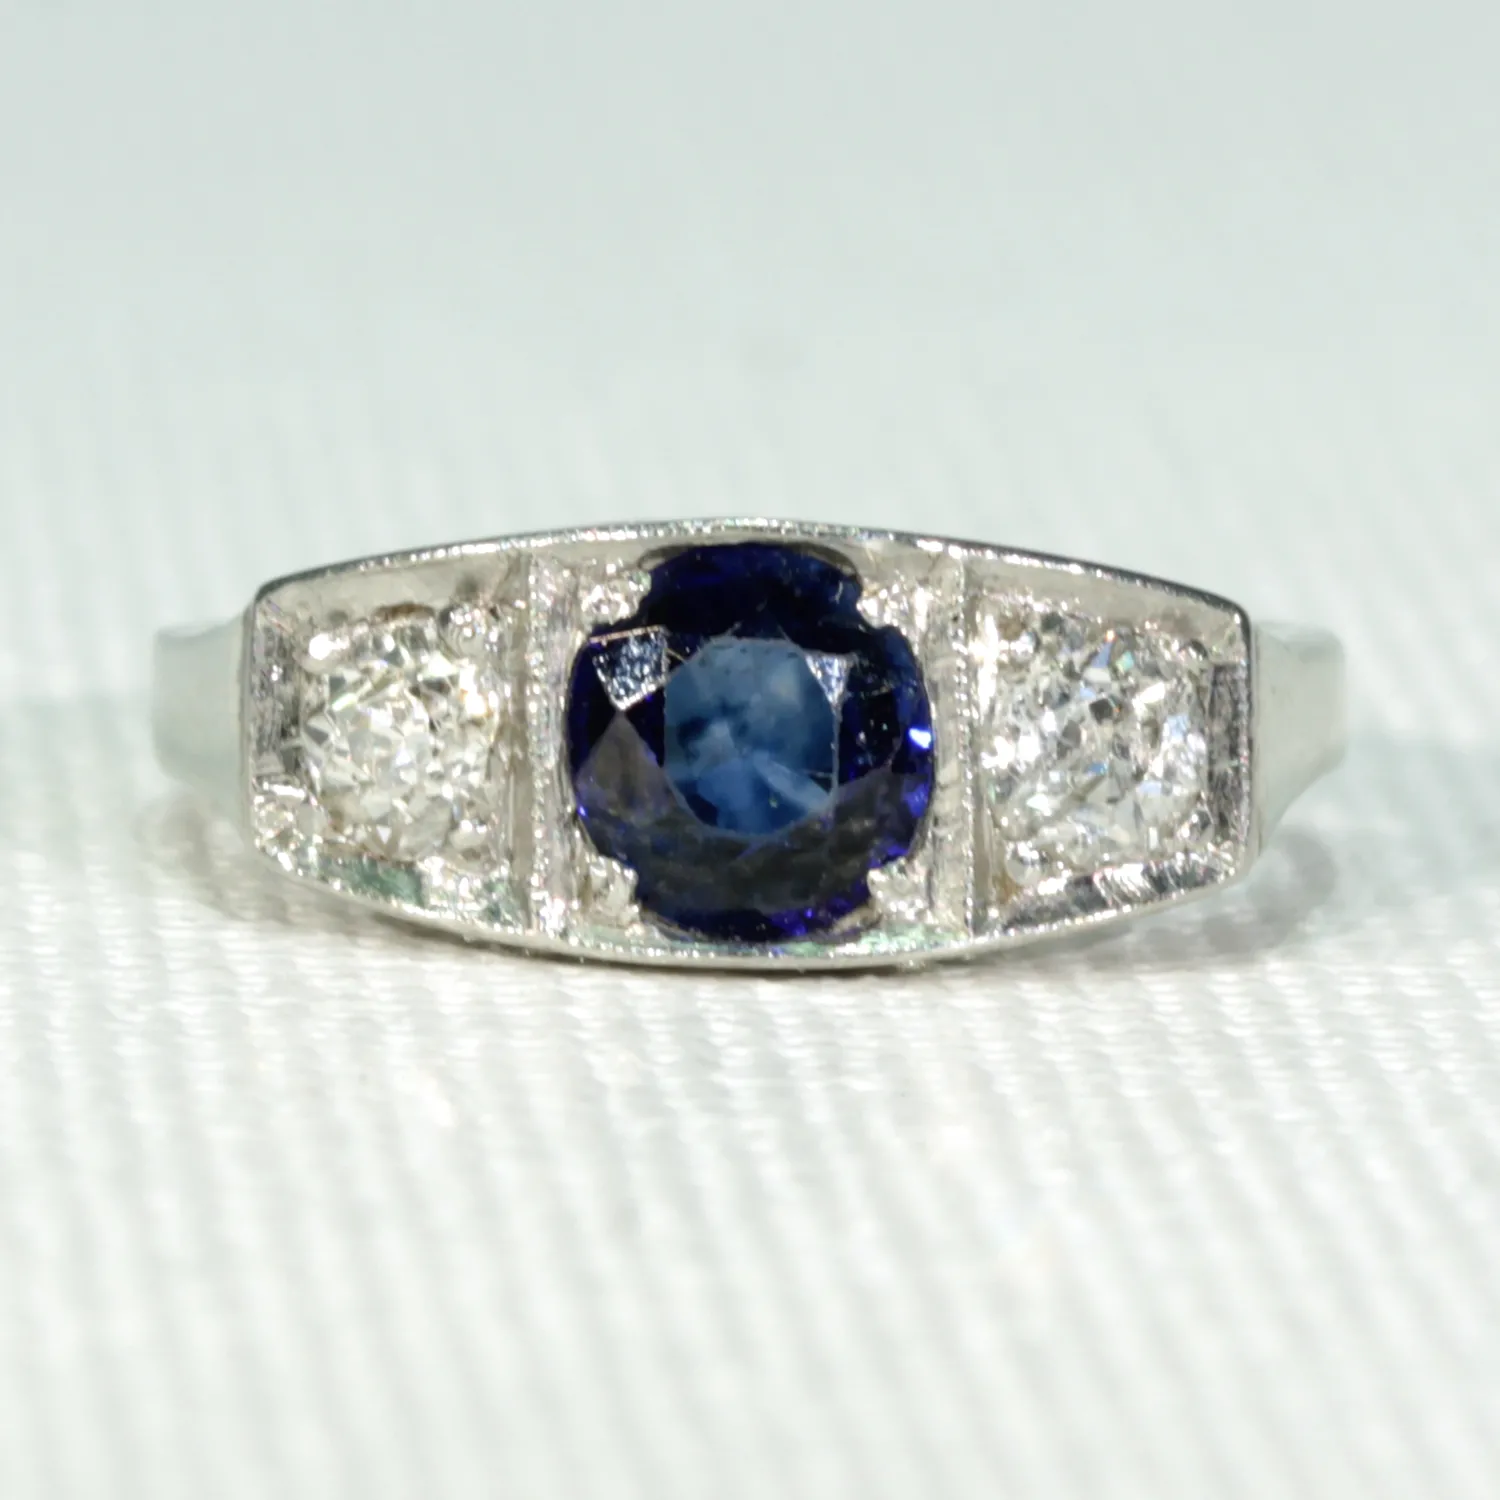 Antique French Art Deco Sapphire Diamond Ring Engagement Ring